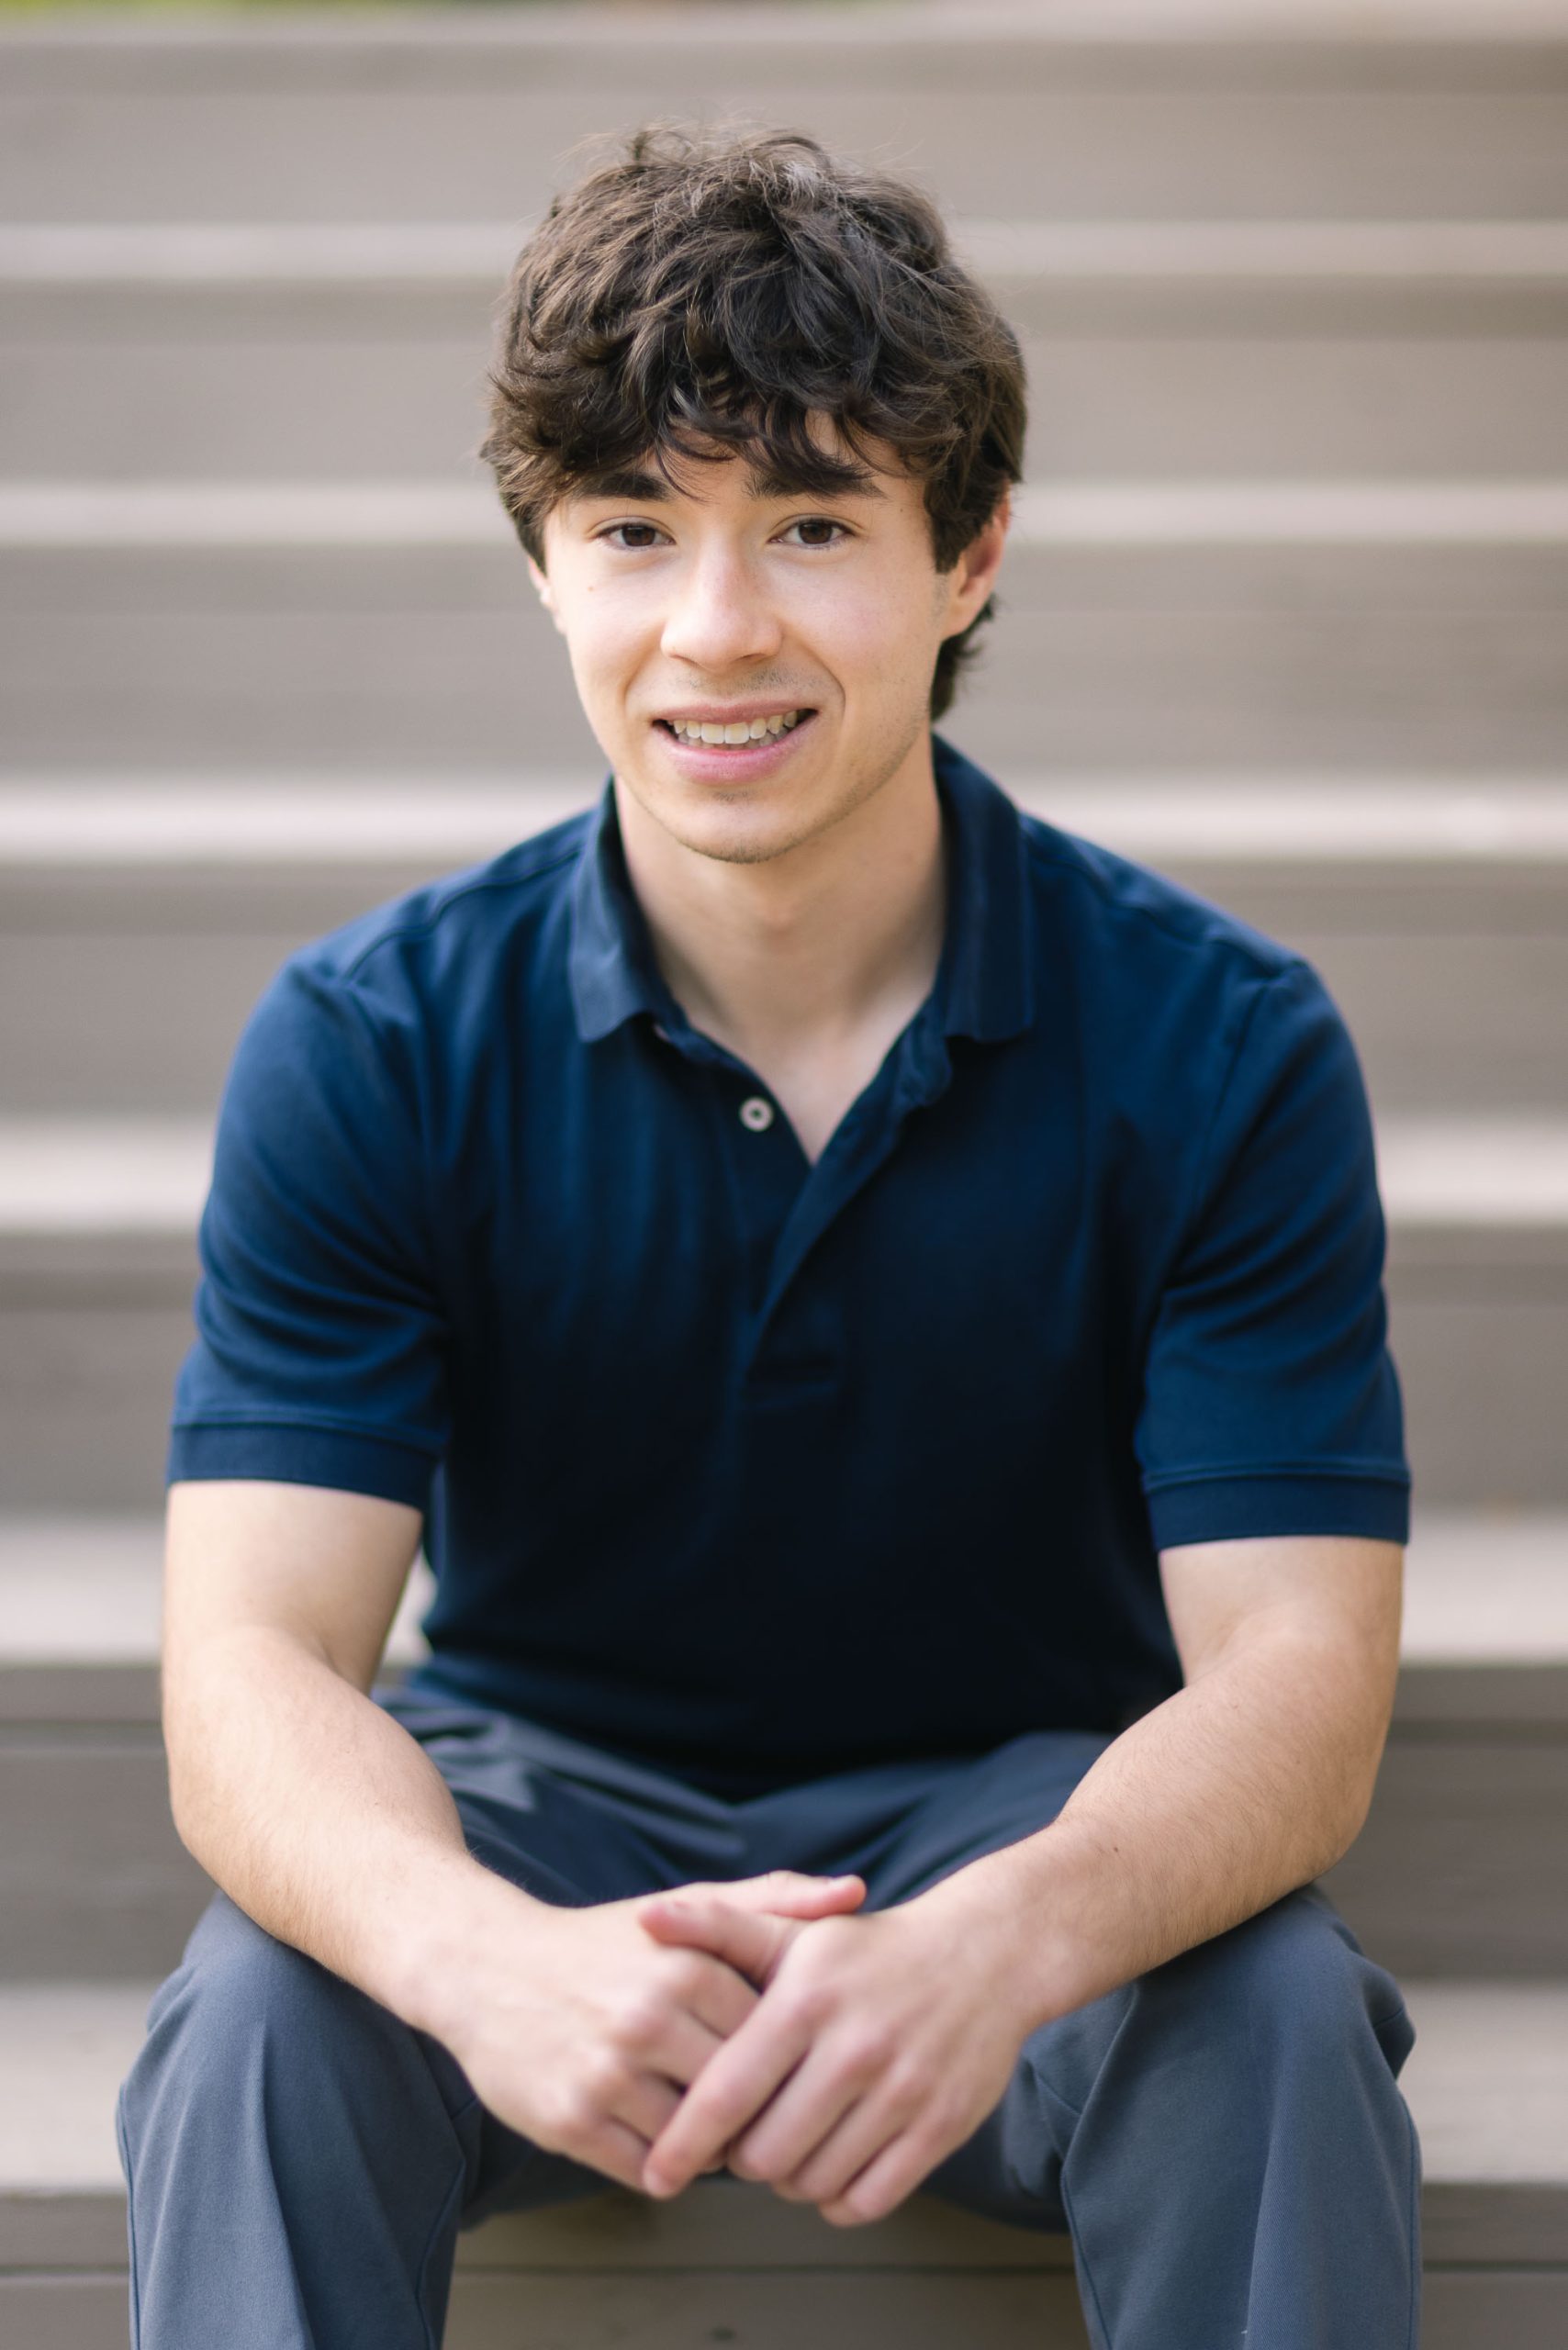 A young man in a blue shirt sitting on steps, potentially in a graduation portrait.